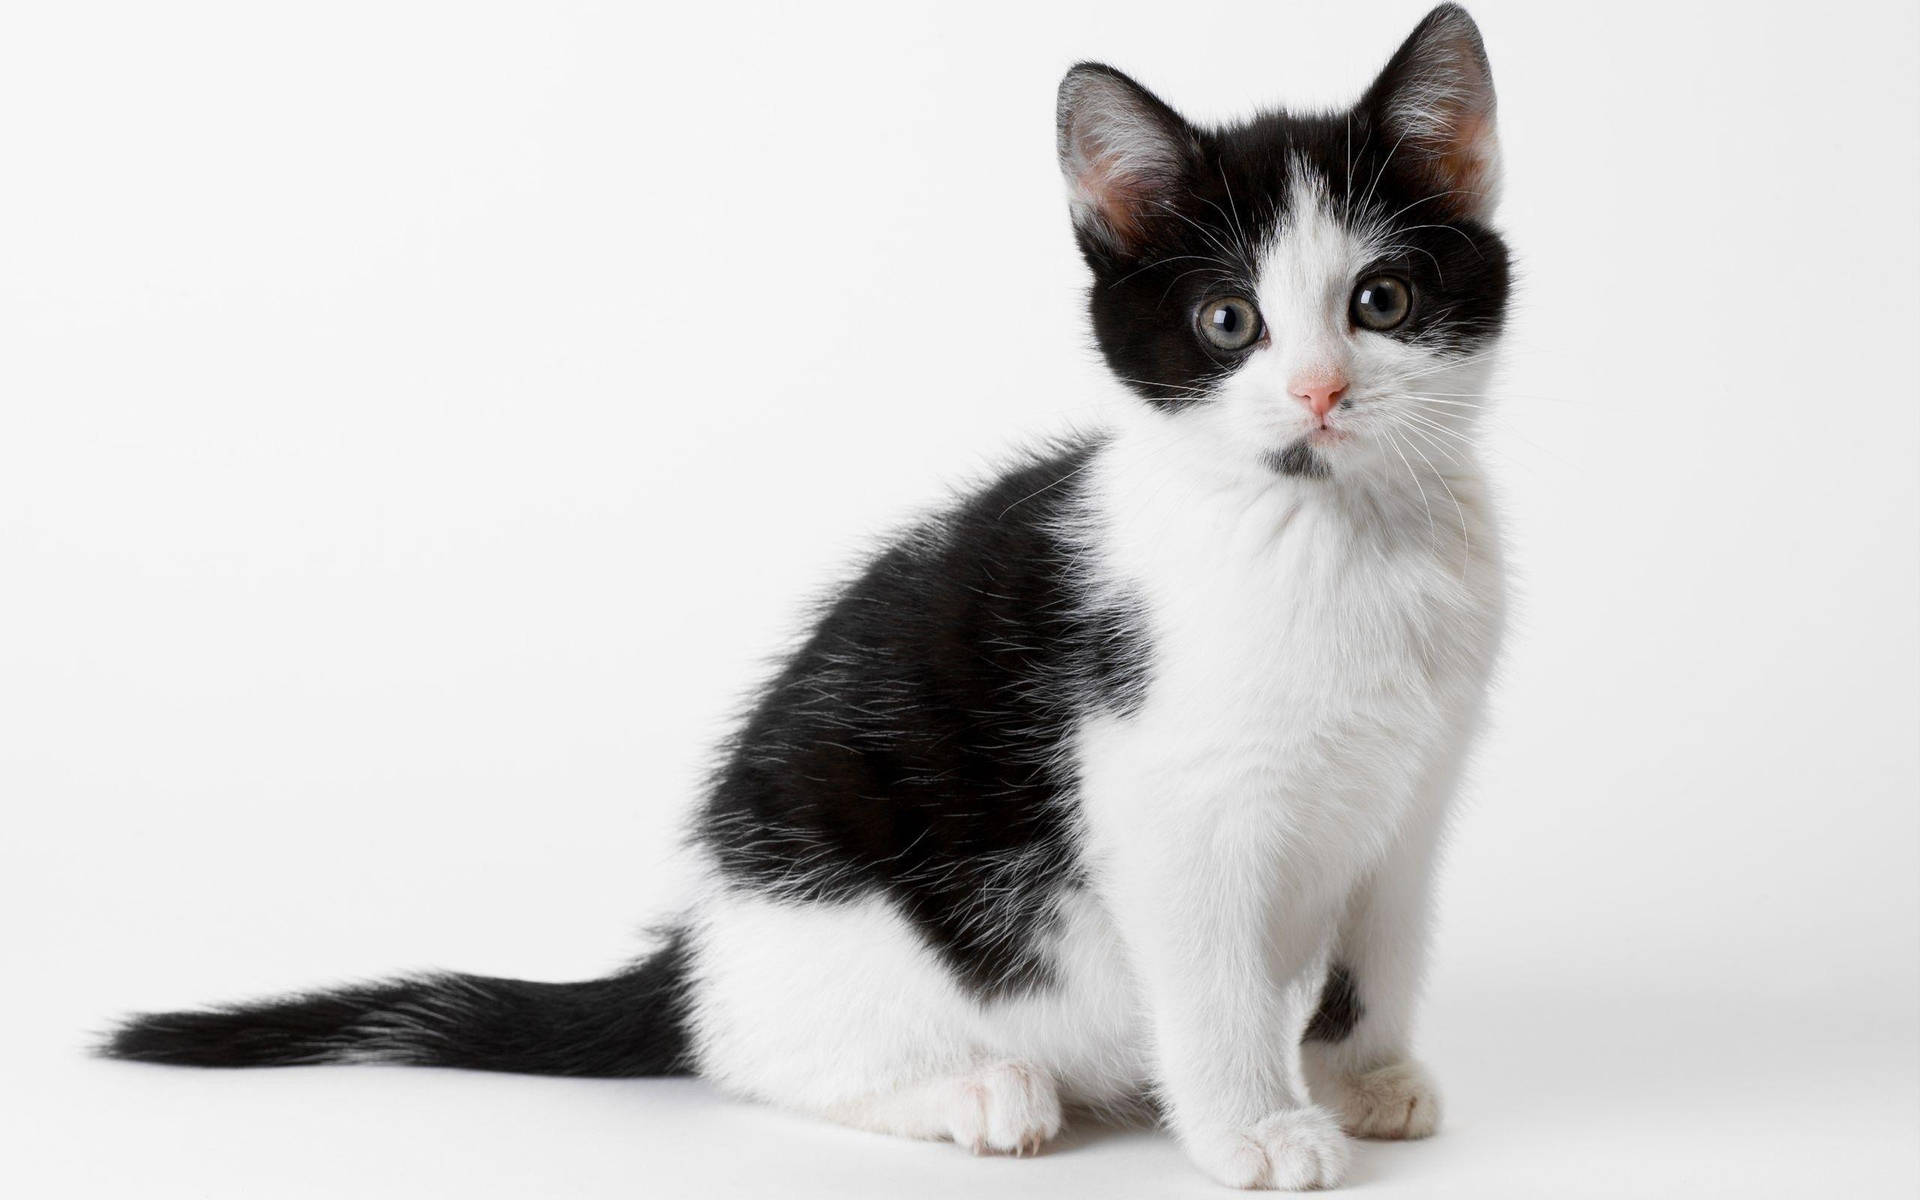 Black And White Cat With Chin Birthmark Wallpaper